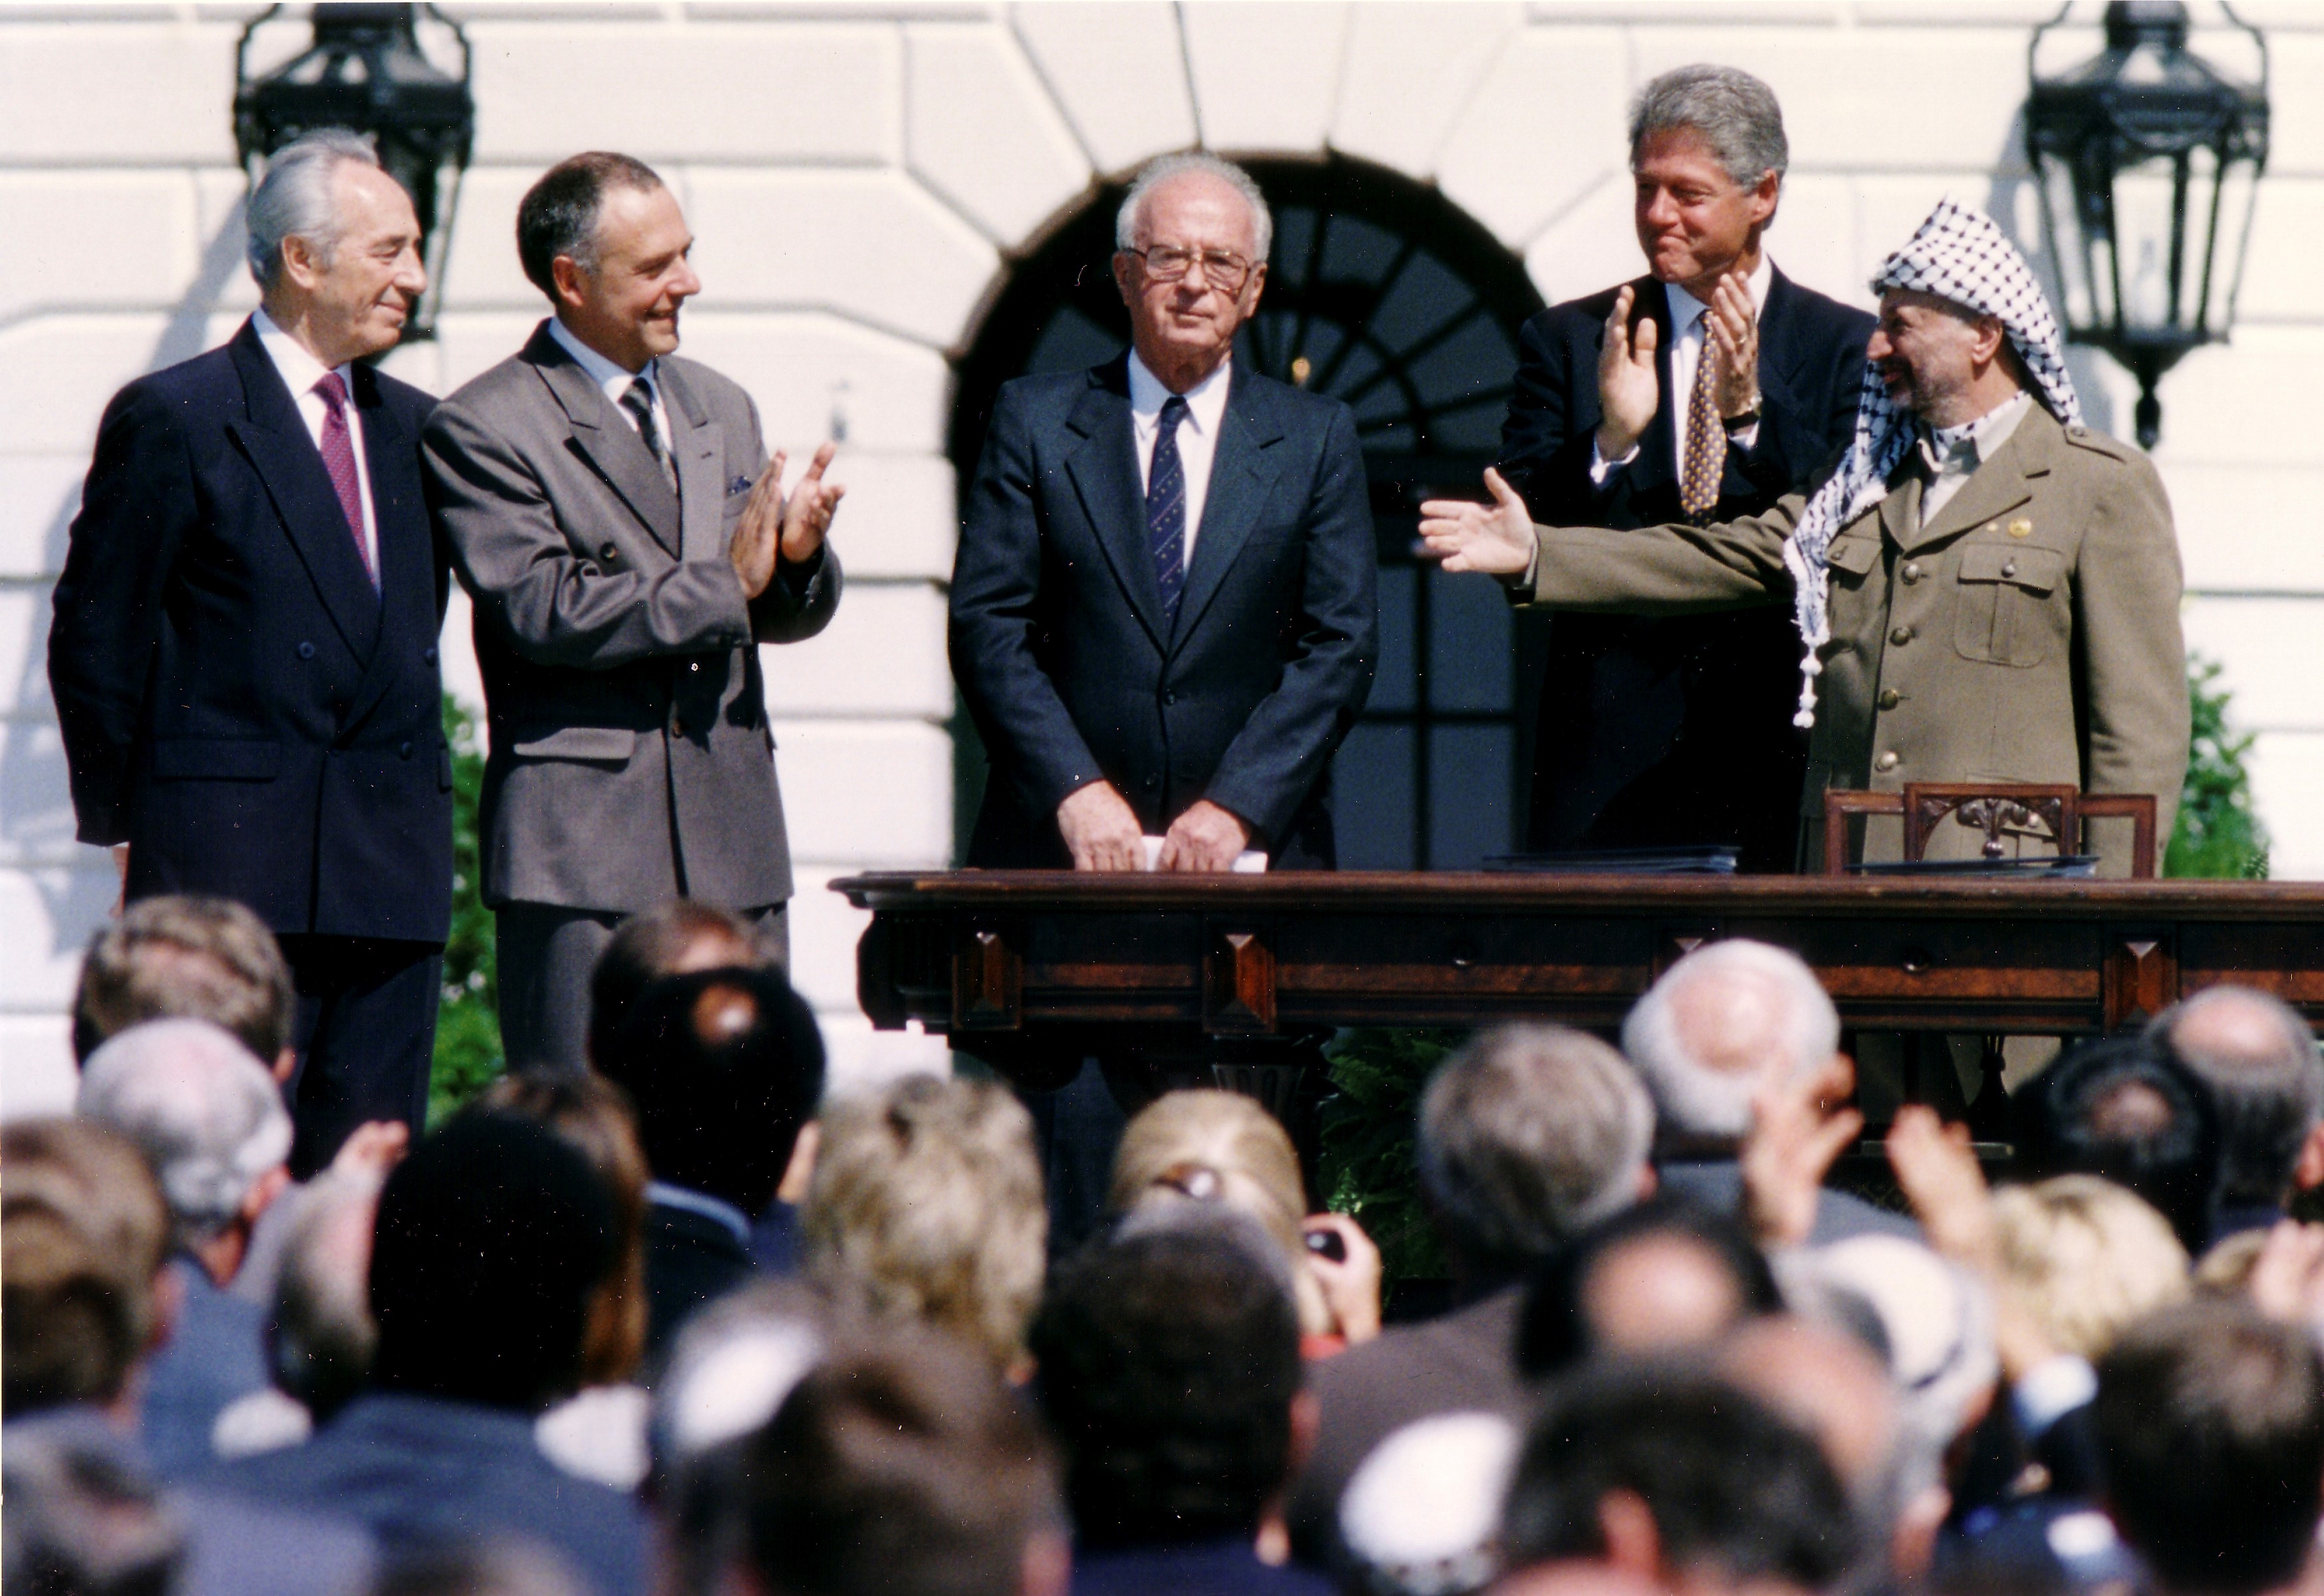   PLO Chairman Yasser Arafat (R) gestures to Israeli Prime Minister Yitzhak Rabin (3rd R), as US President Bill Clinton (2nd R) stands between them at the White House on 13 September, 1993 (Reuters)